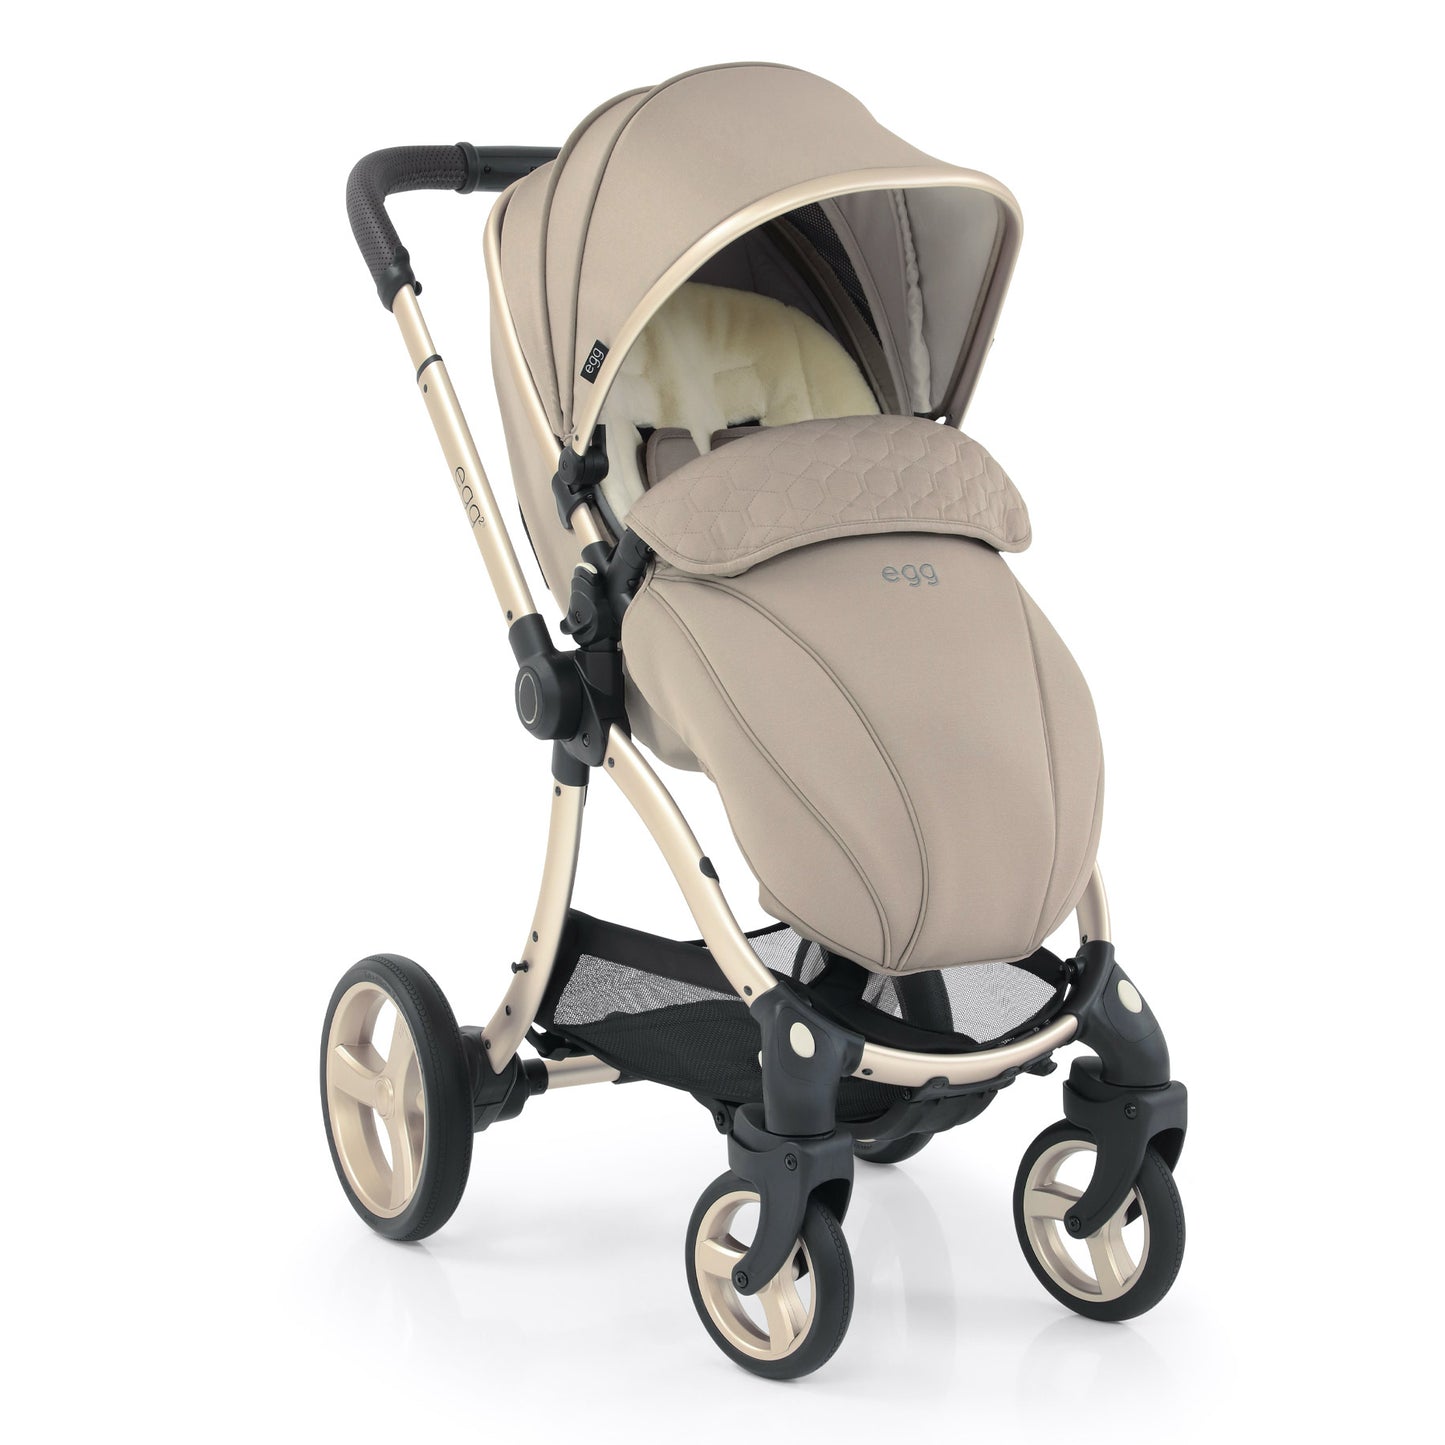 egg2® Stroller & Carry Cot in Feather Bundle